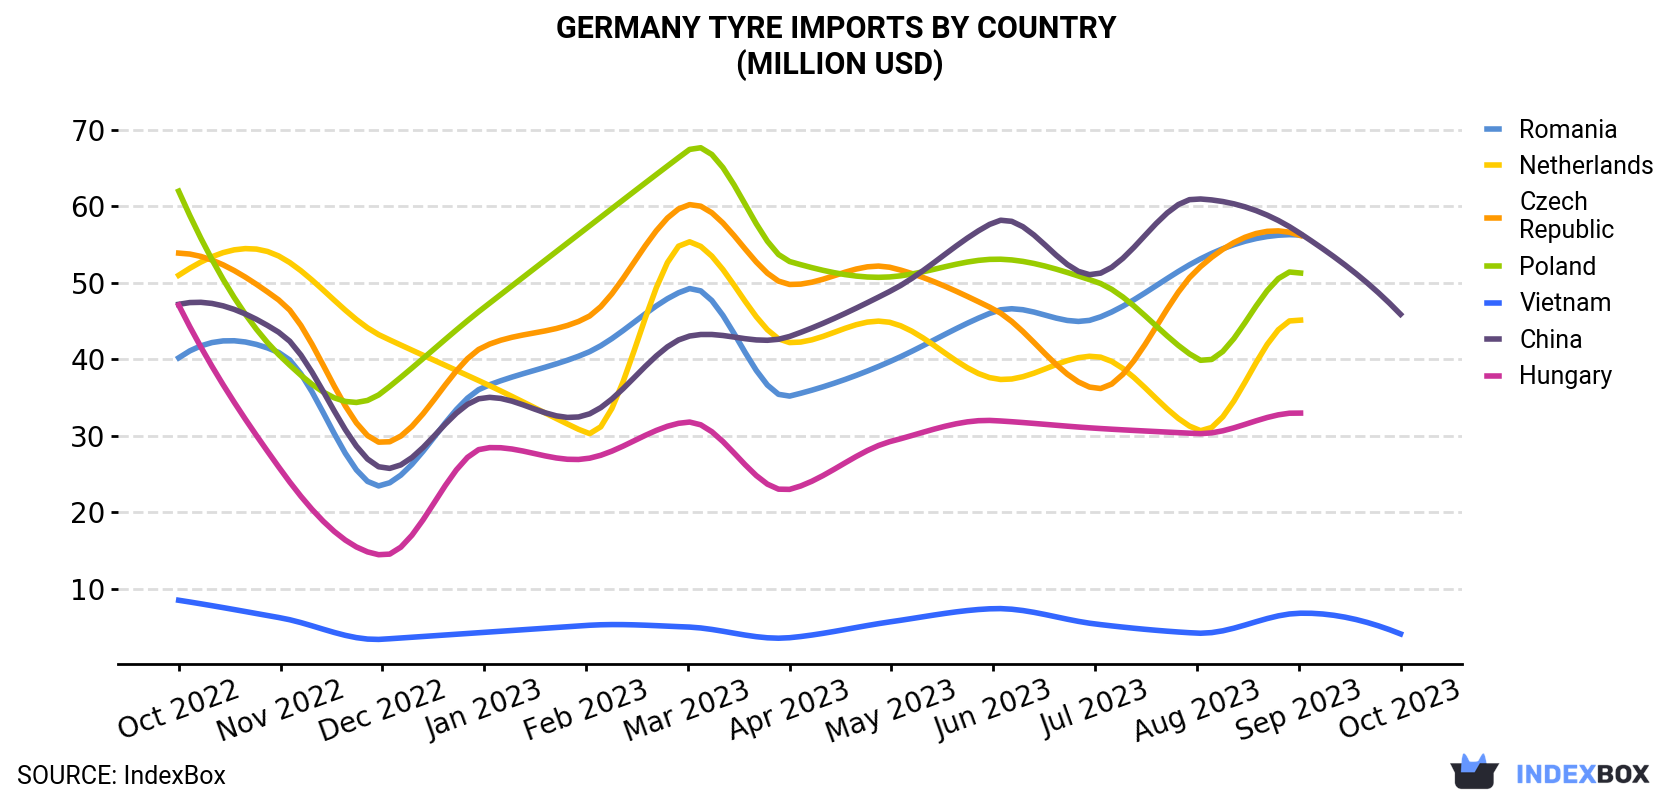 Germany Tyre Imports By Country (Million USD)